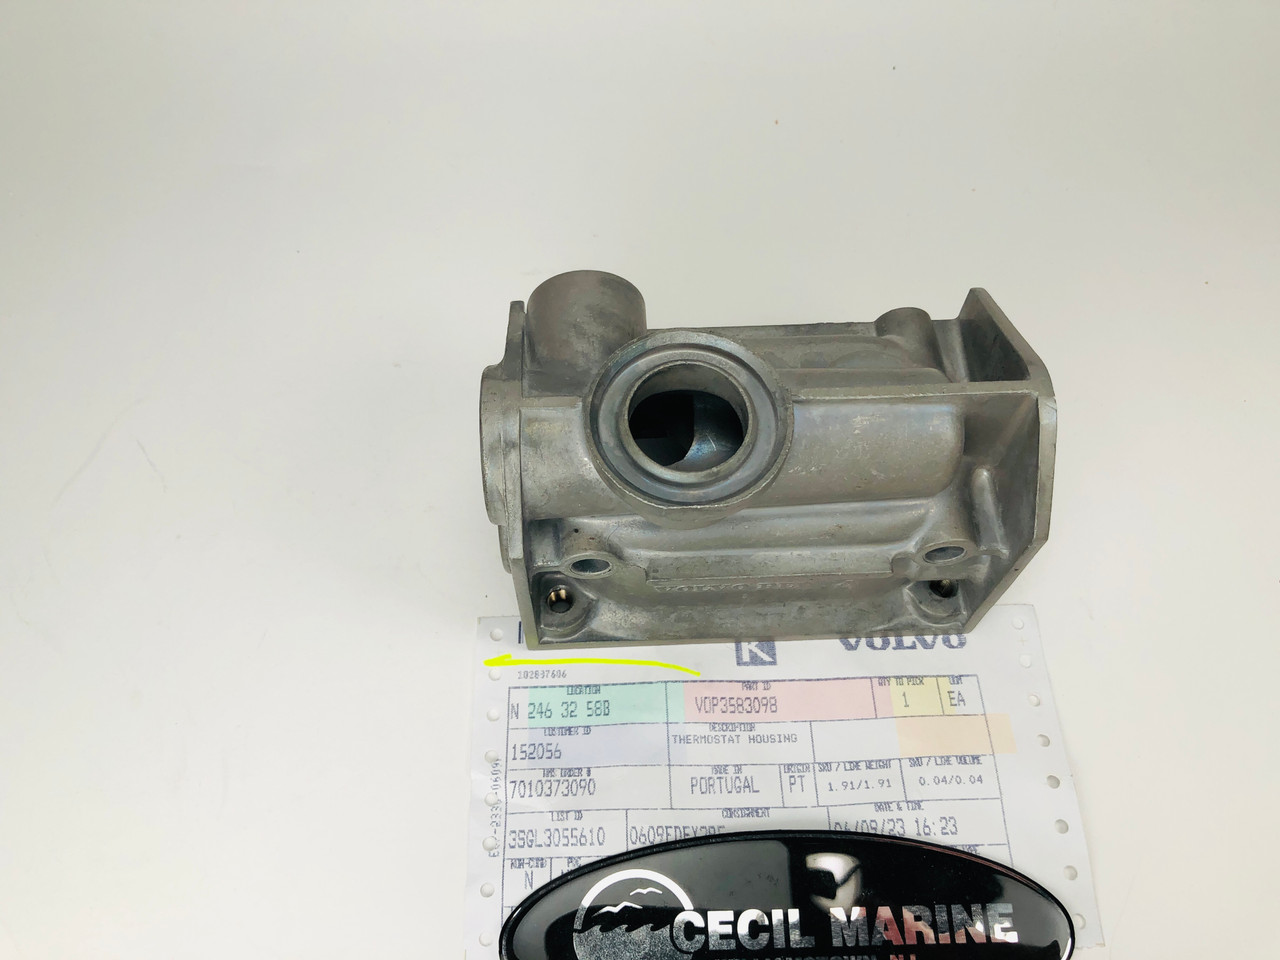 $169.99* GENUINE VOLVO no tax* THERMOSTAT HOUSING 3583098 *In Stock & Ready To Ship!